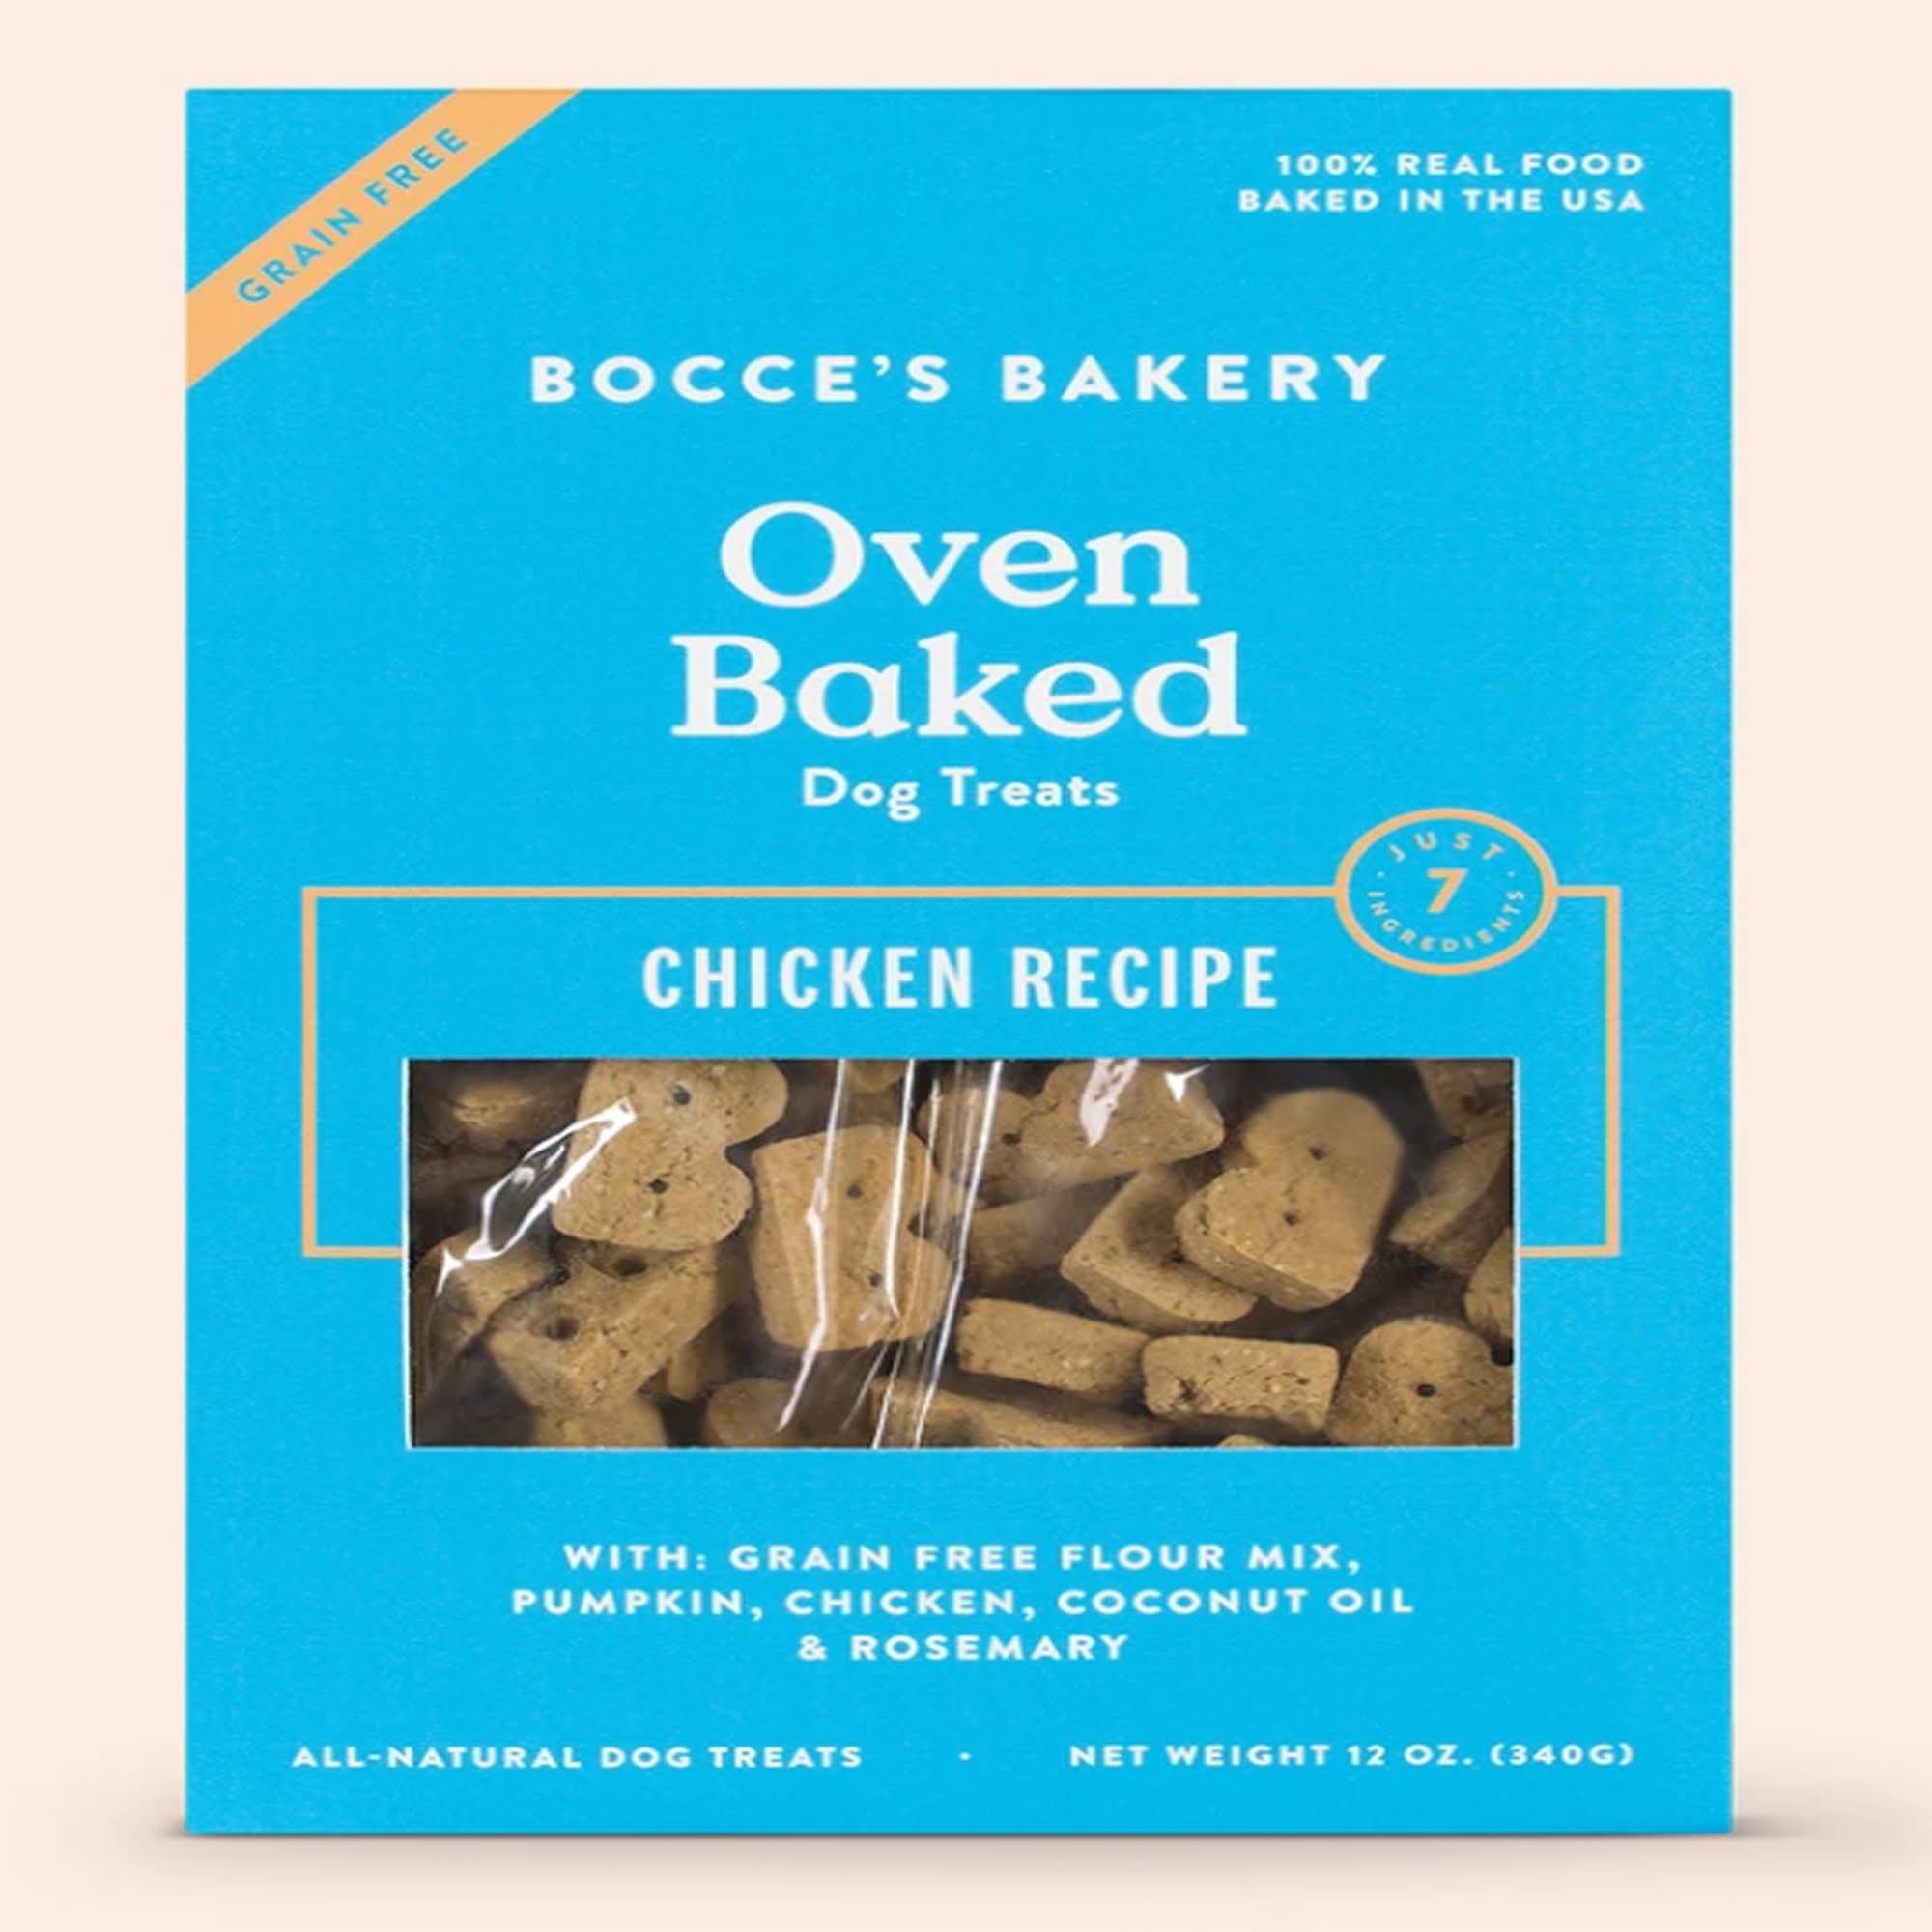 Bocces Bakery Dog Biscuits, Grain Free, with Chicken - 12 oz